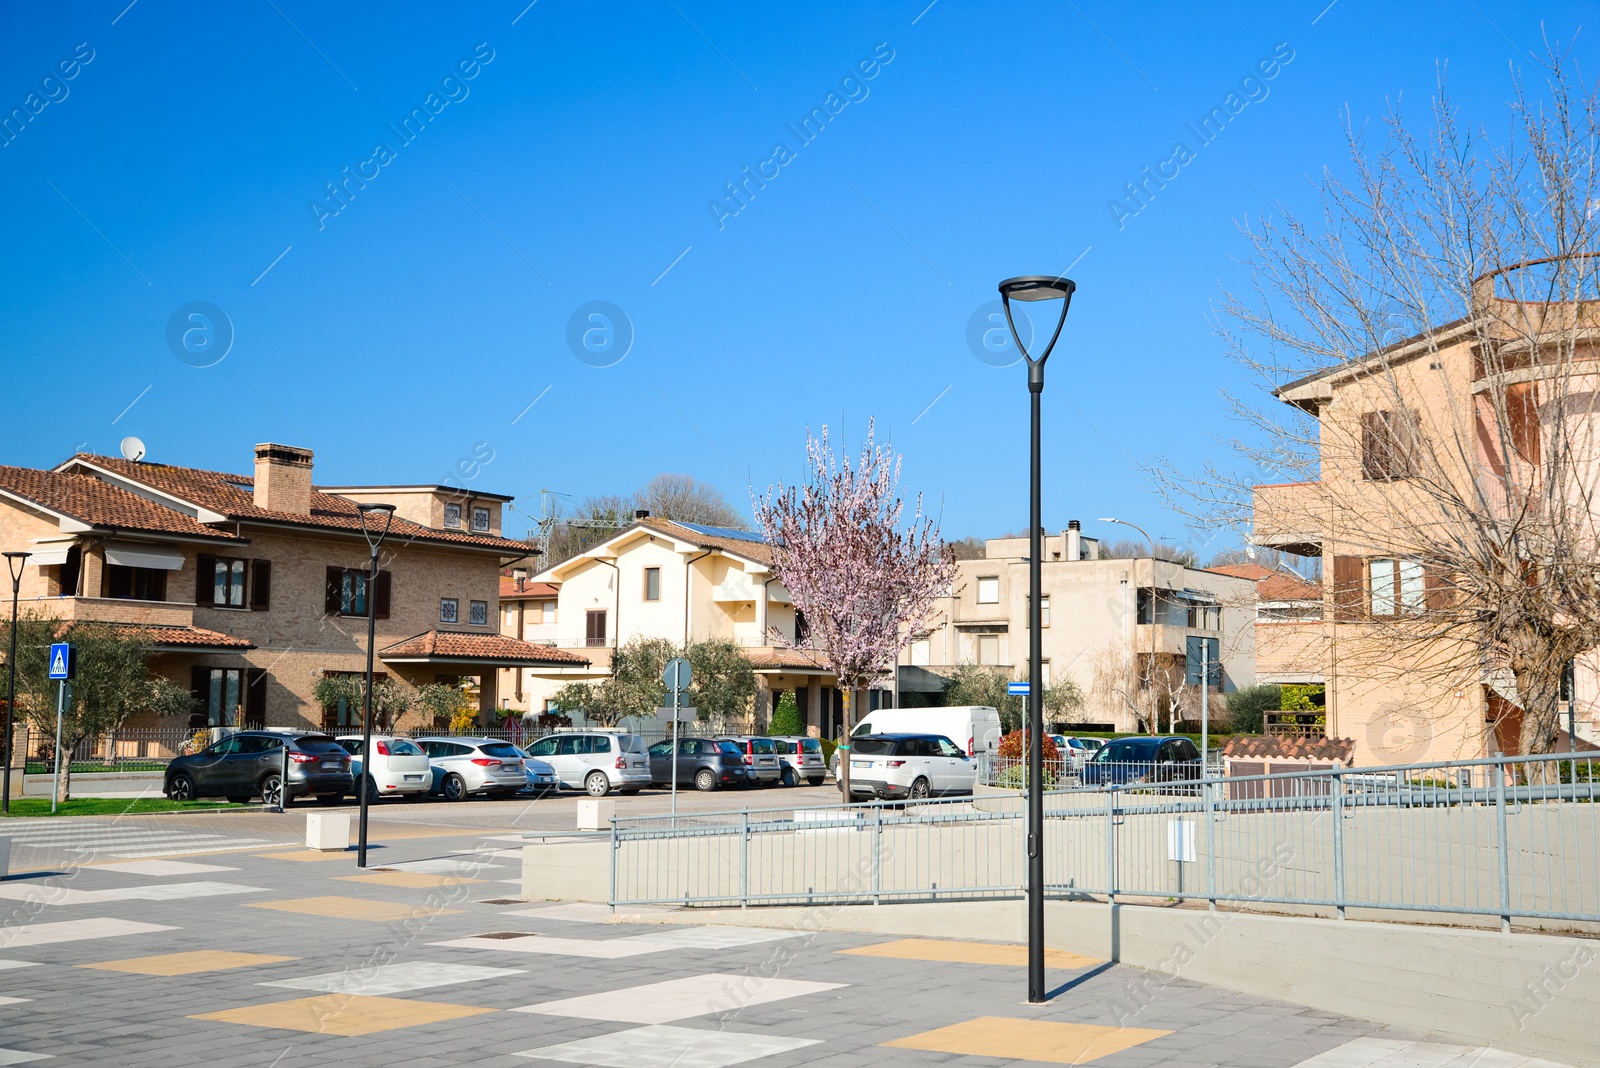 Photo of Beautiful city square with street lights surrounded by cars and houses on sunny day